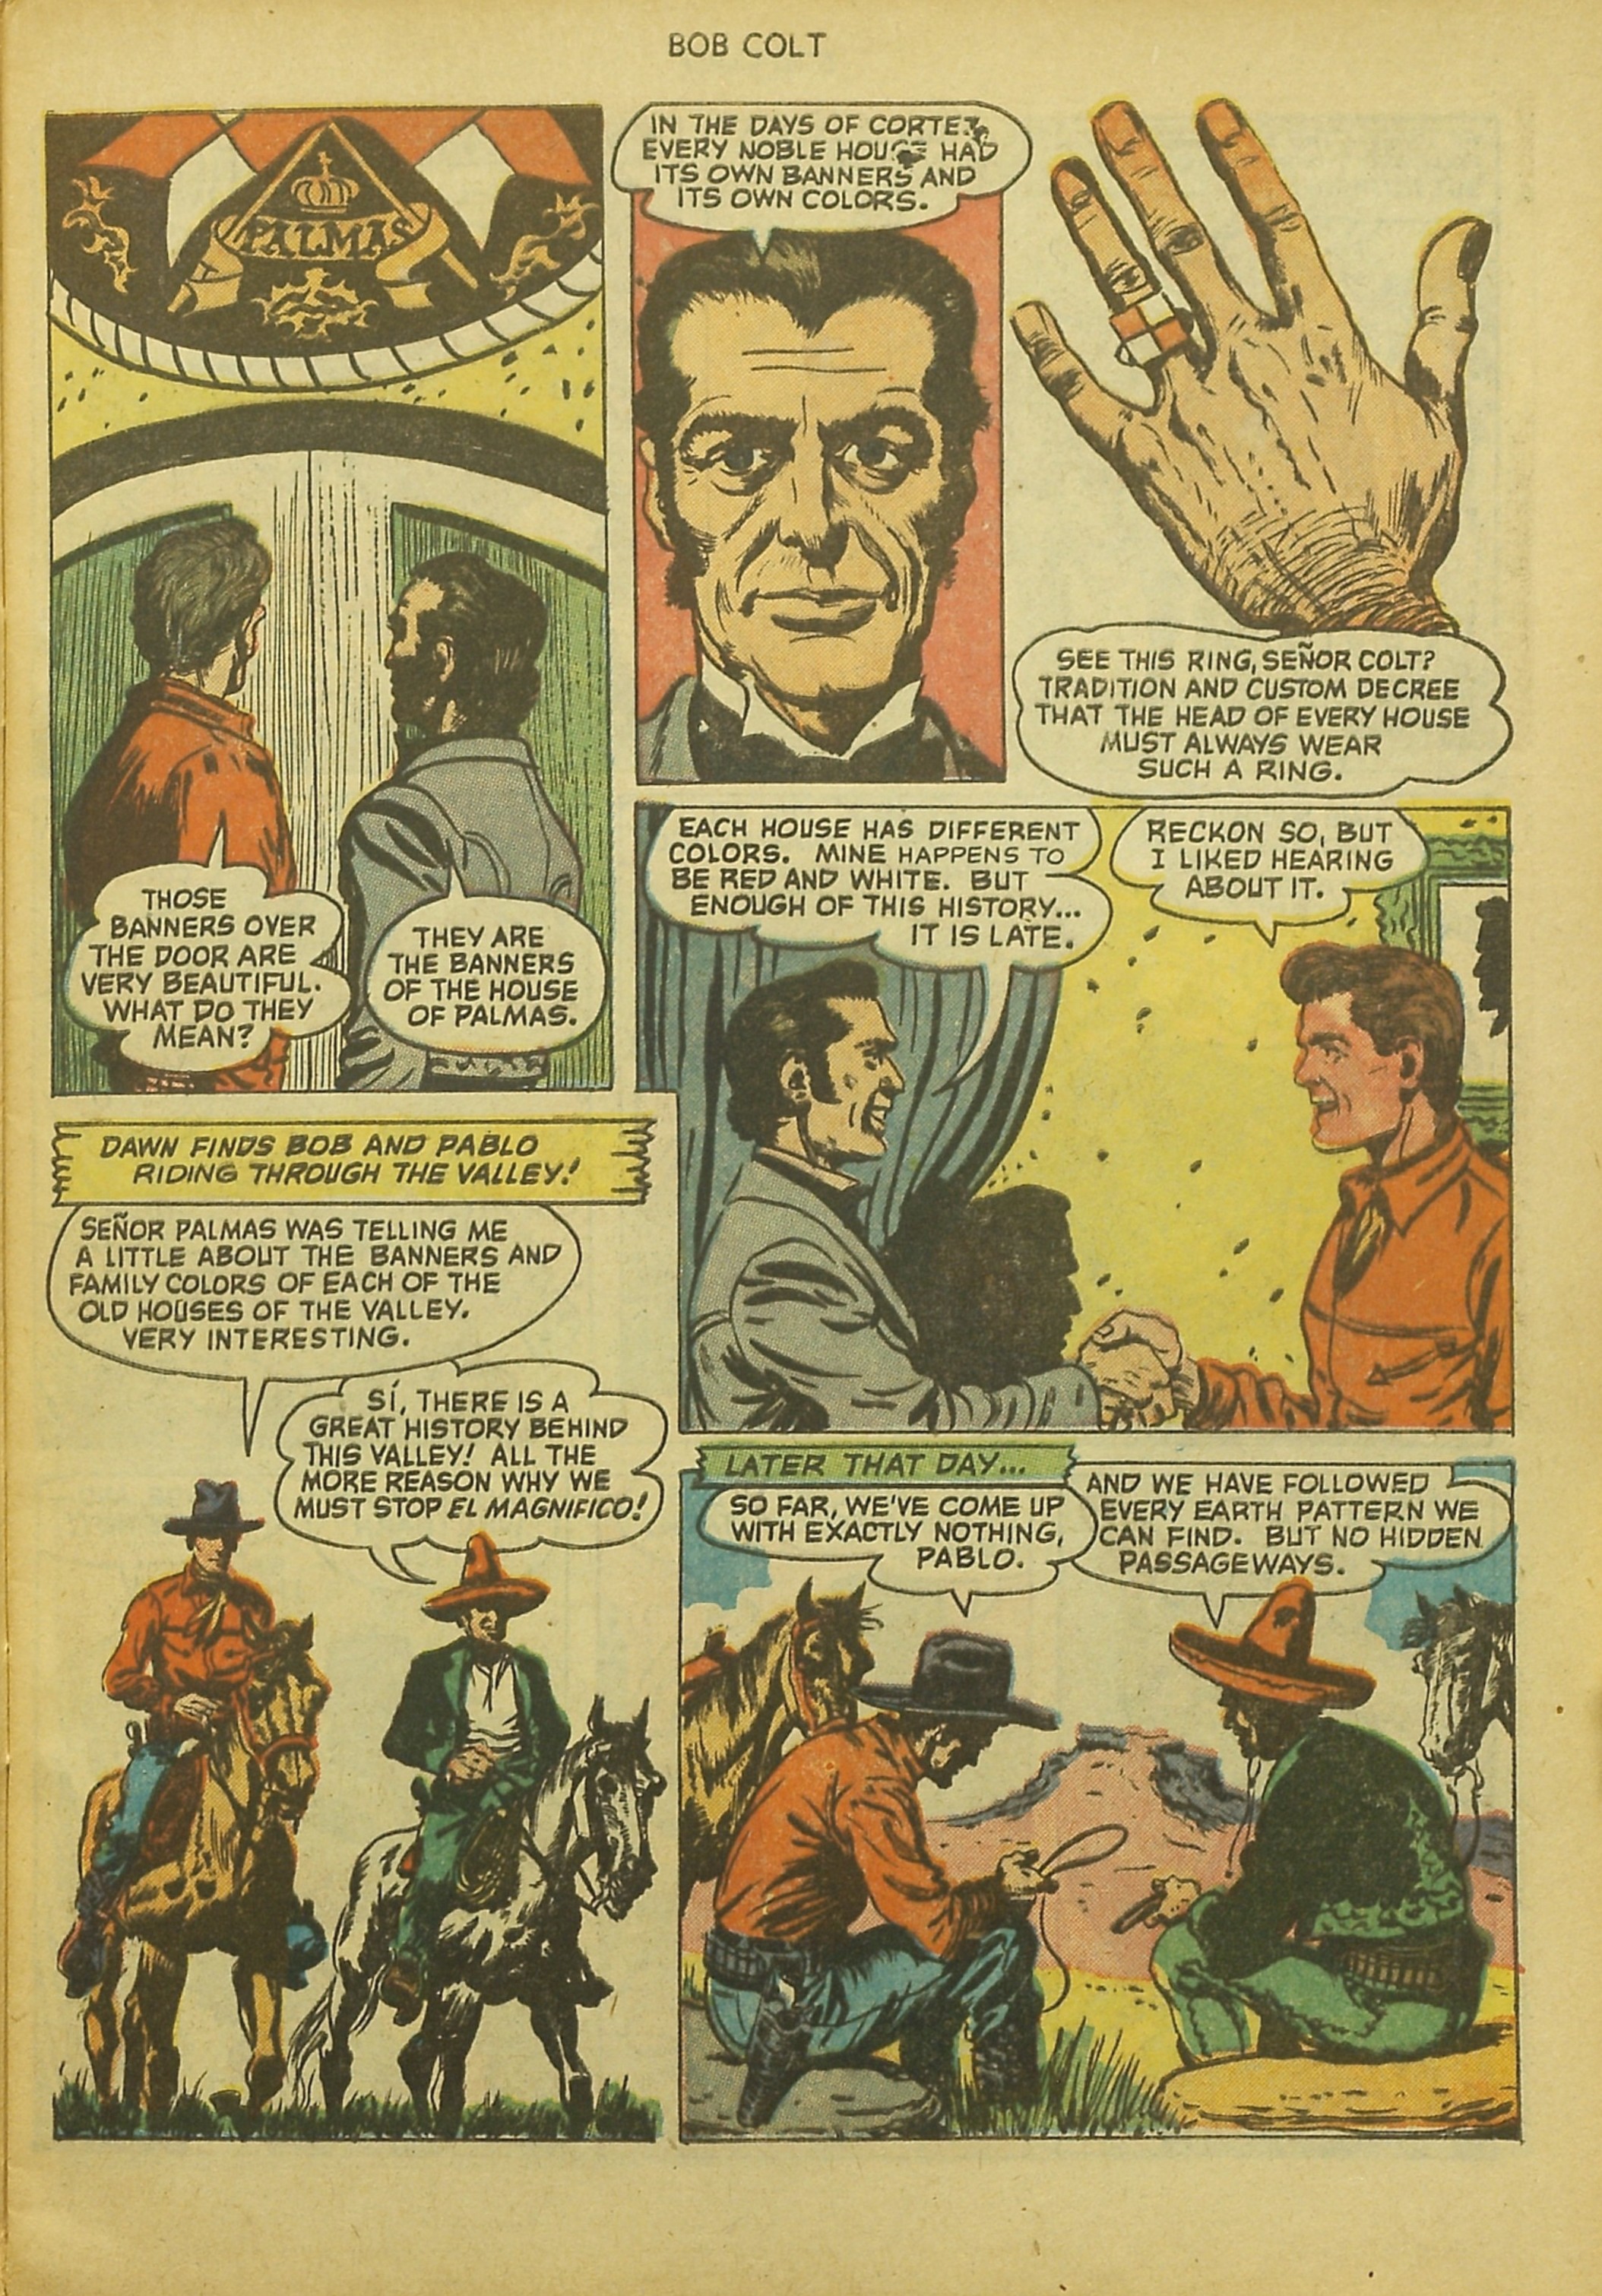 Read online Bob Colt Western comic -  Issue #9 - 9